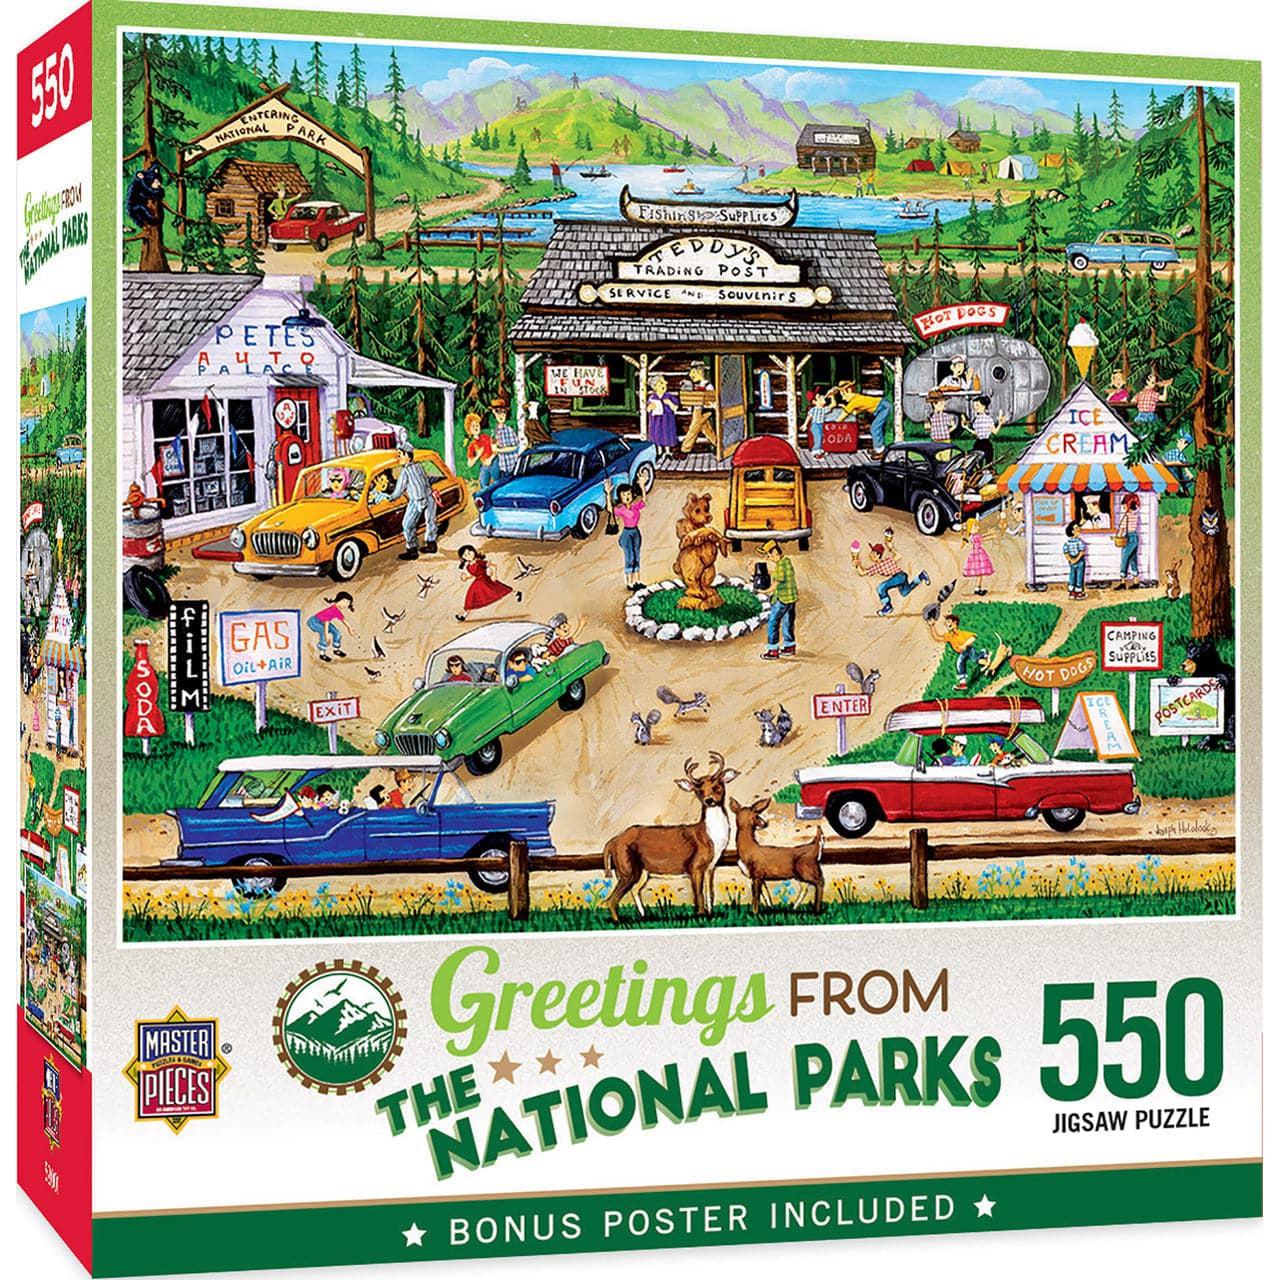 MasterPieces-Greetings From - The National Parks - 550 Piece Puzzle-82226-Legacy Toys